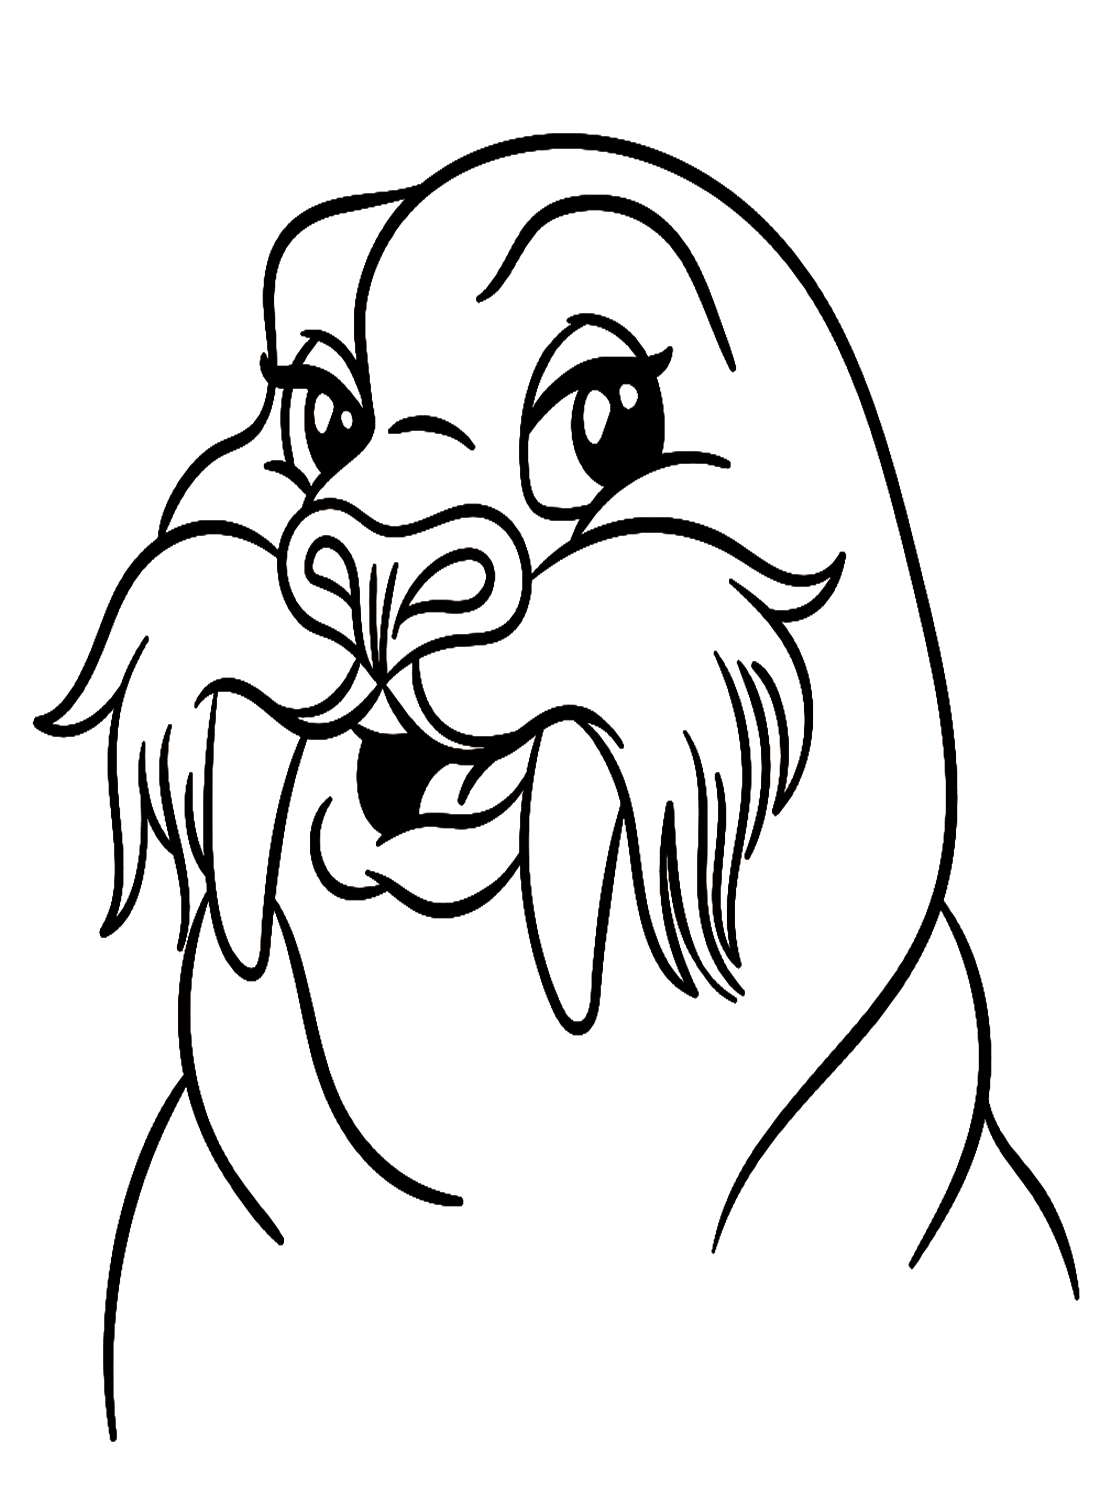 Adorable Walrus Face from Walrus